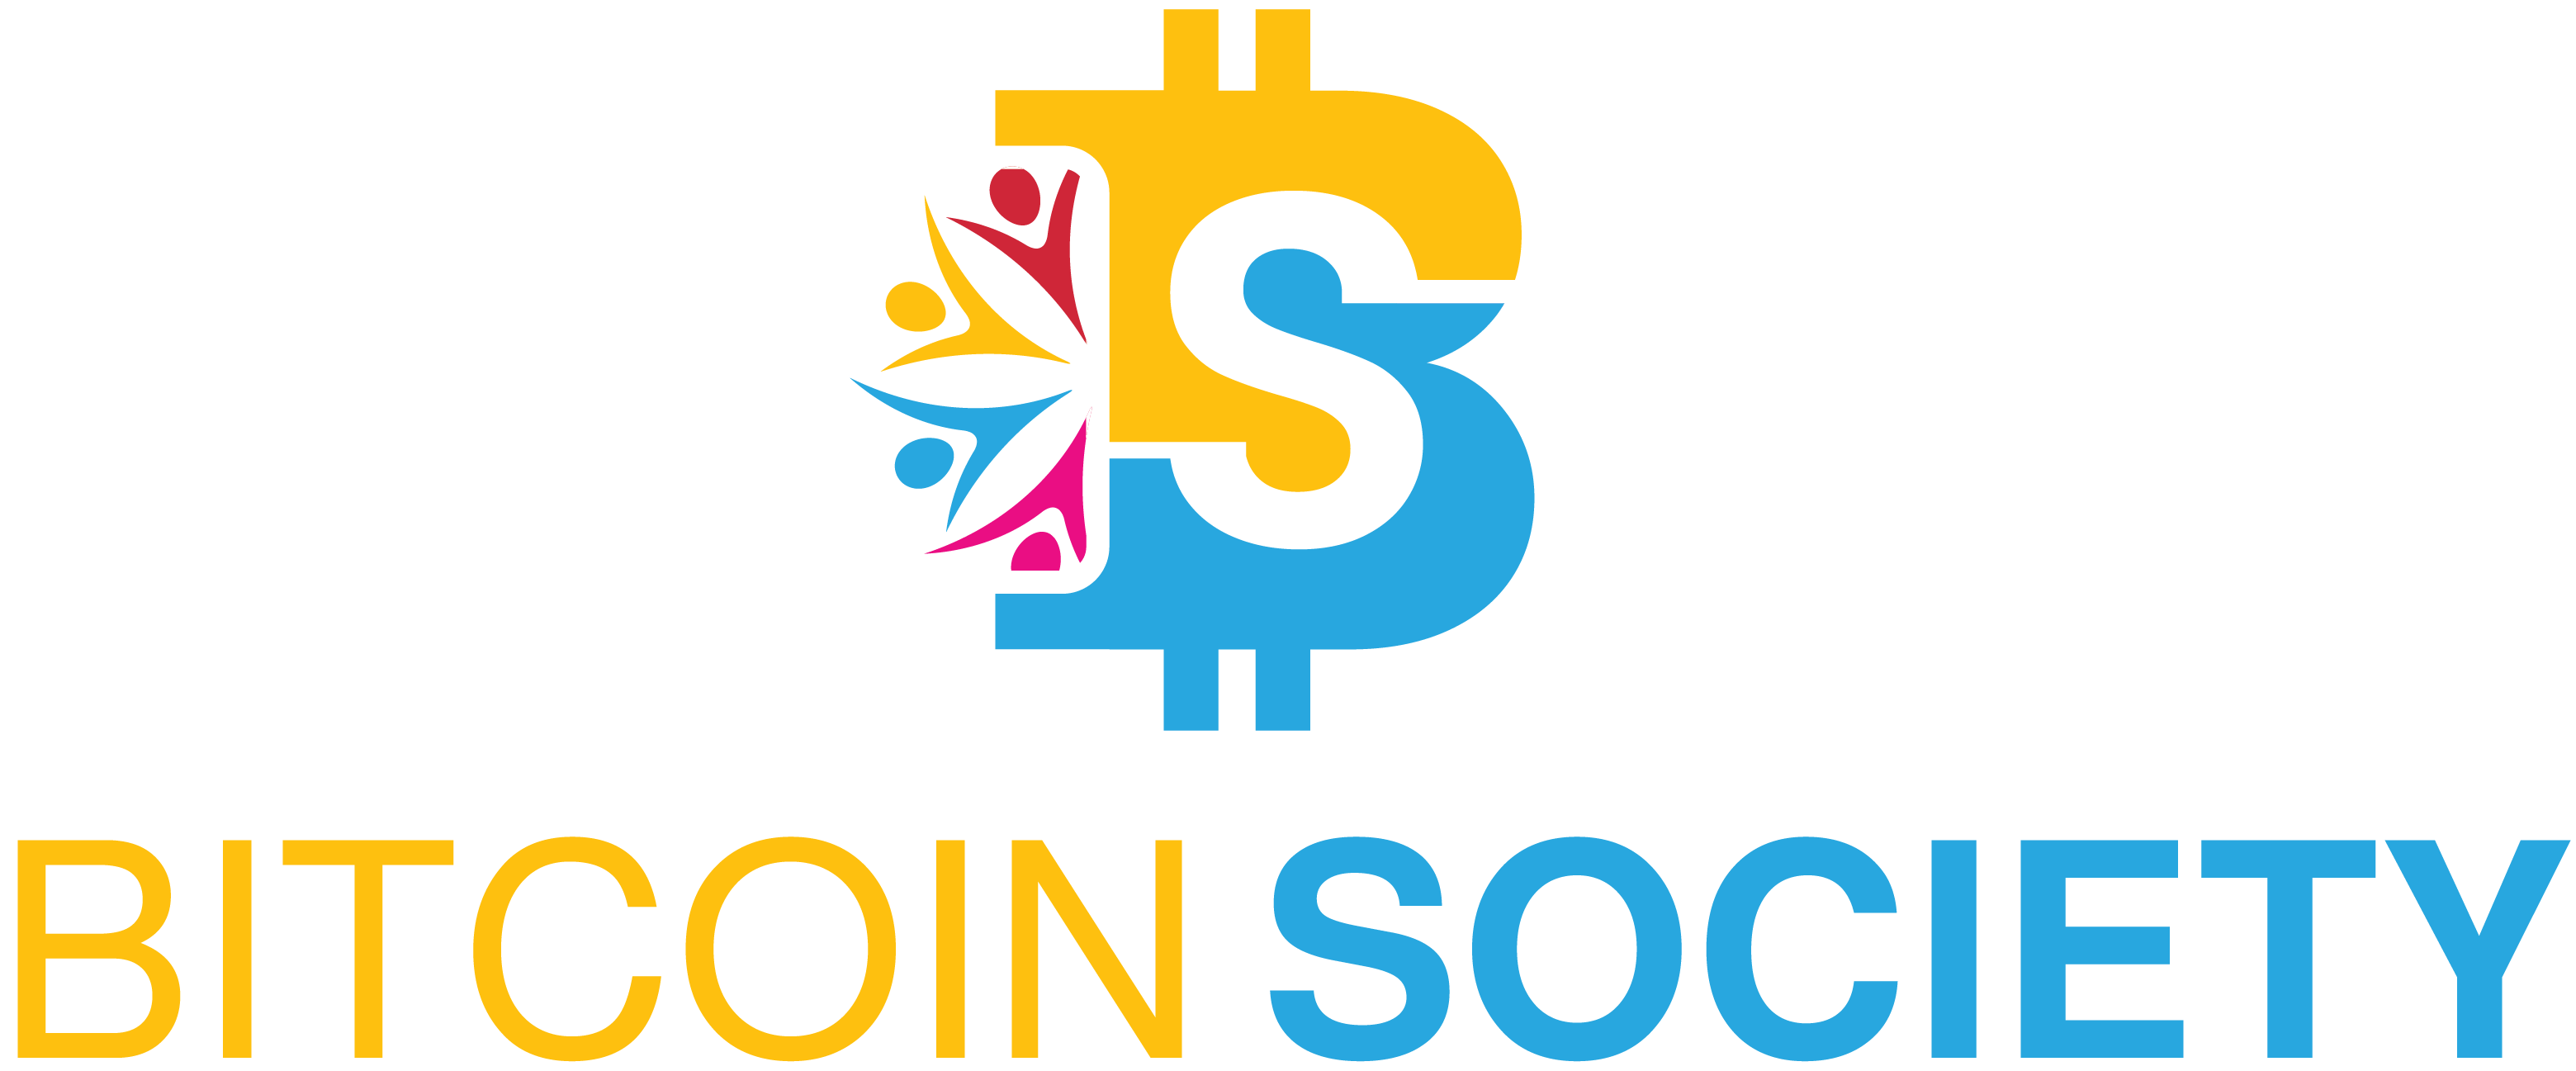 Bitcoin Society - SIGN UP FOR FREE NOW